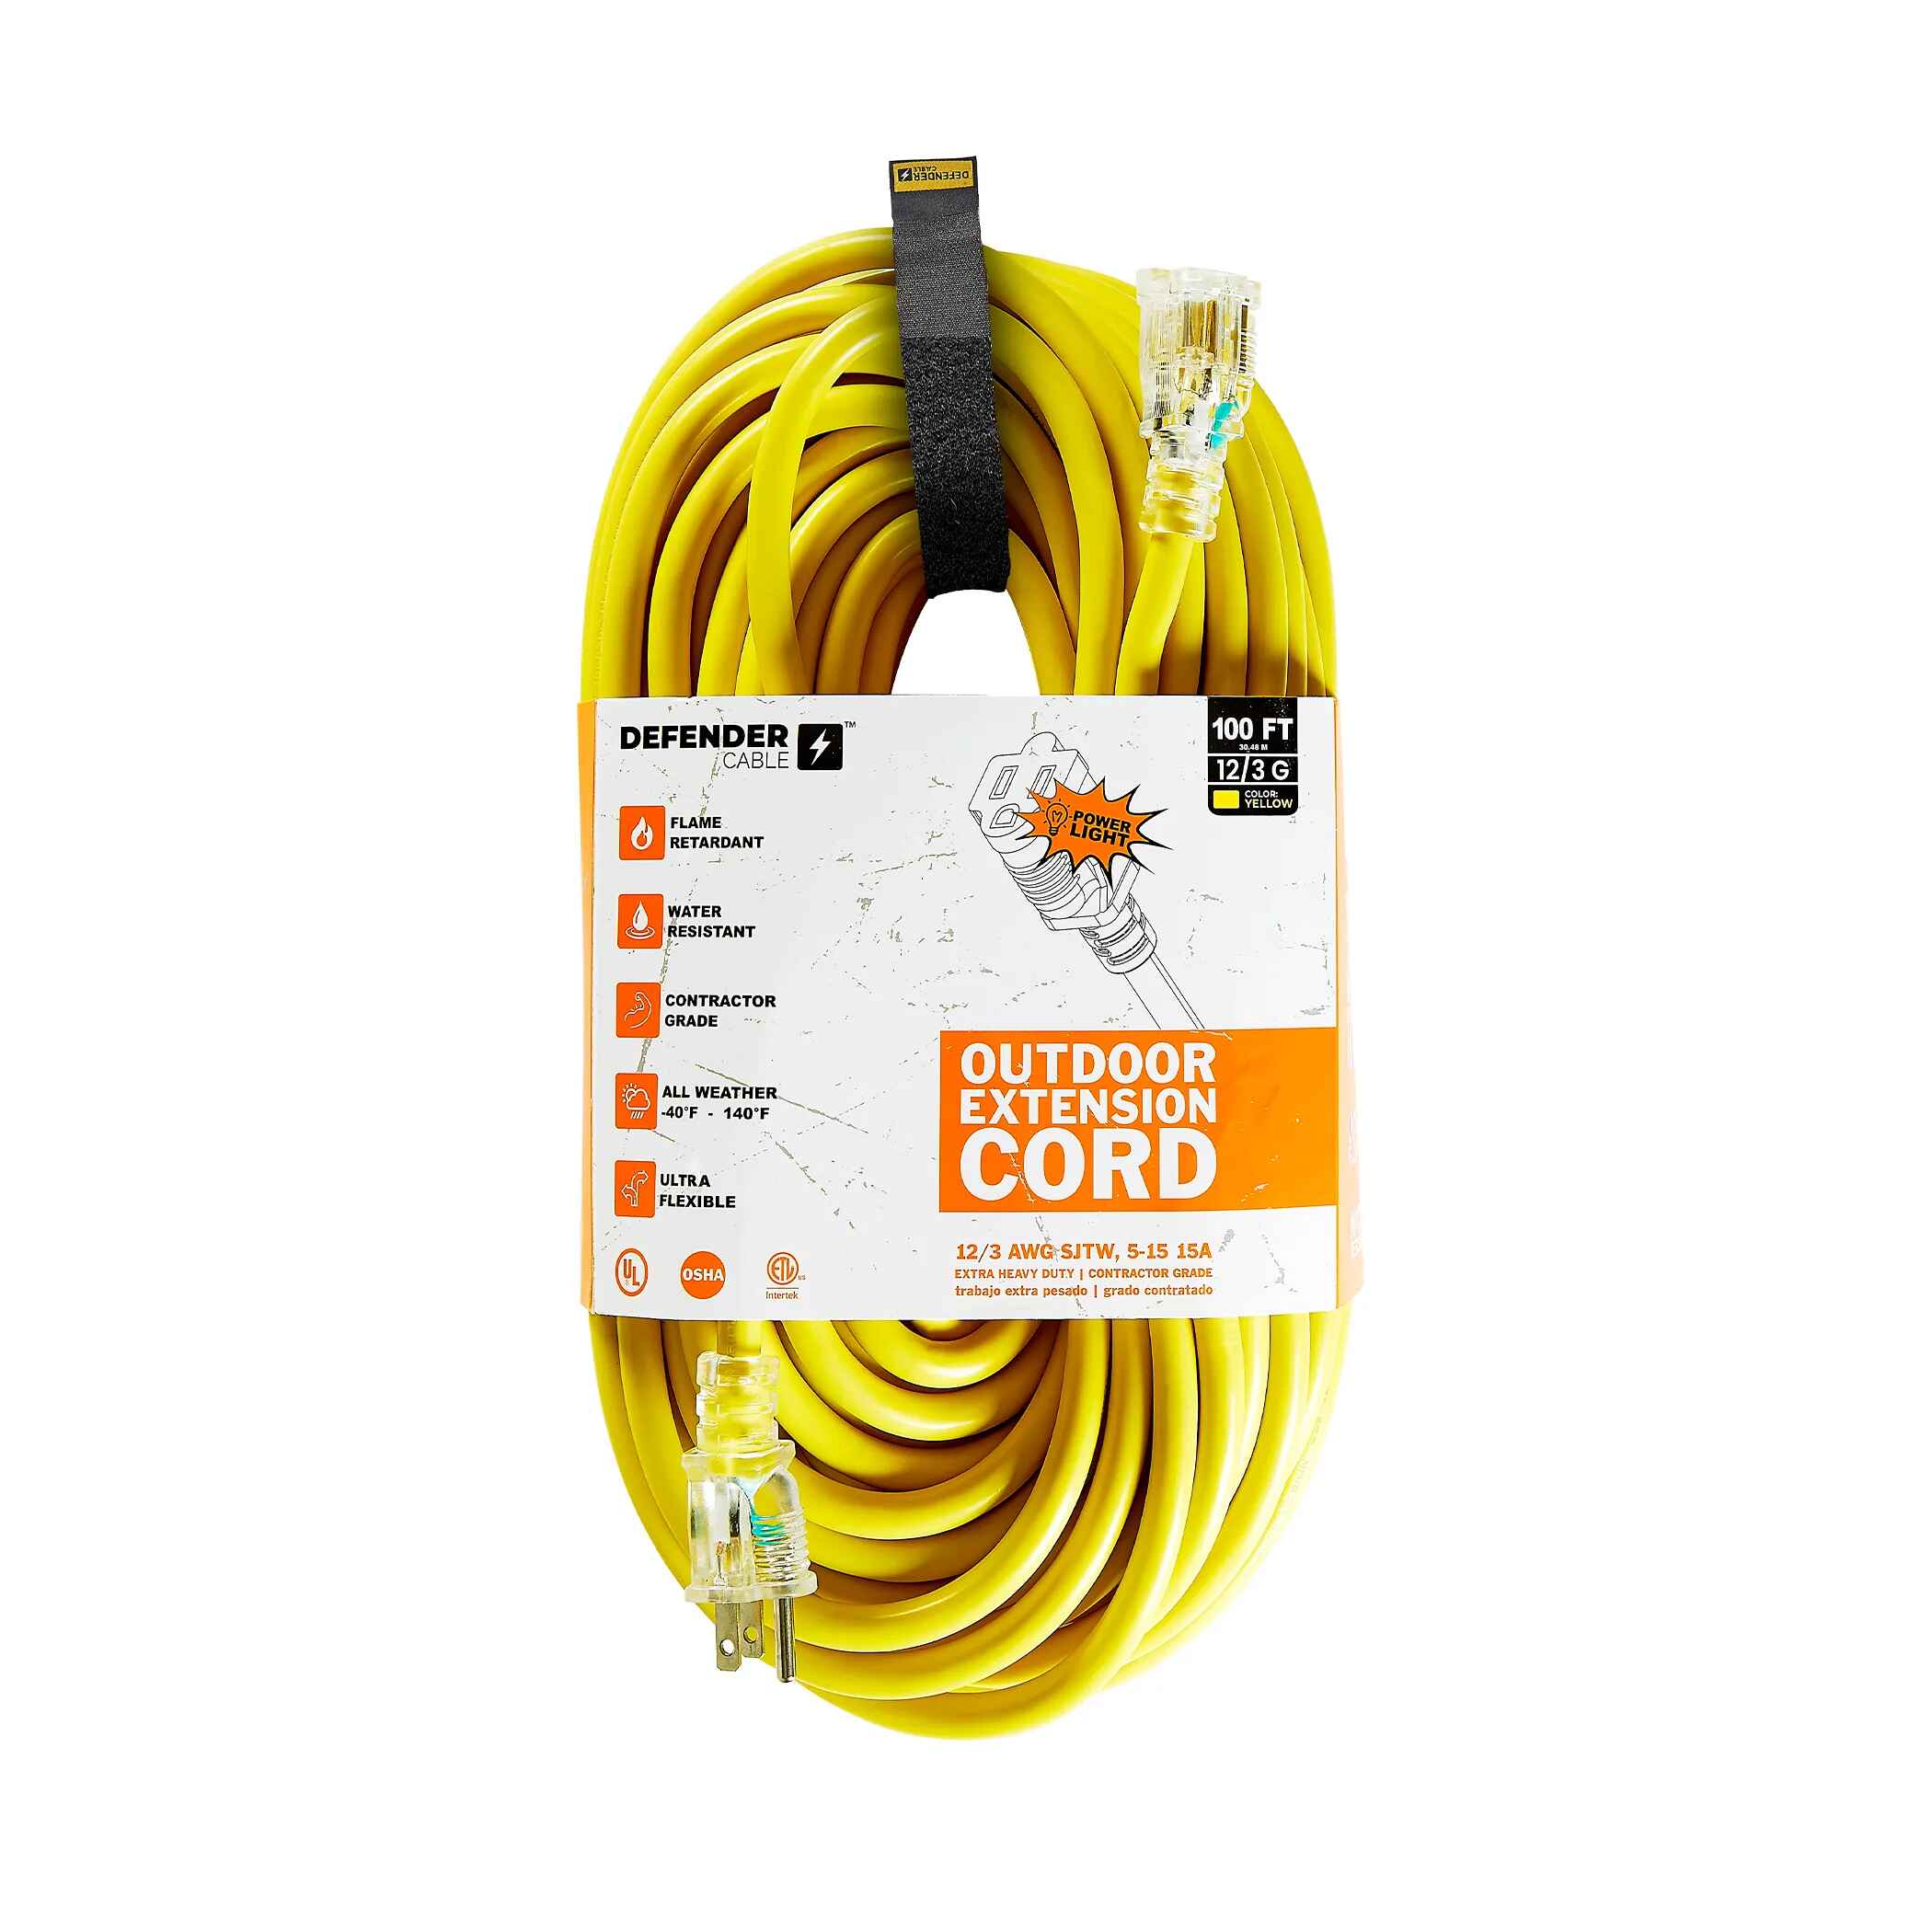 Defender Cable 12/3 Gauge, 100 ft SJTW Contractor Grade Extension Cord, with Lighted end,UL/ETL Listed, All Purpose (Osha Compliant)